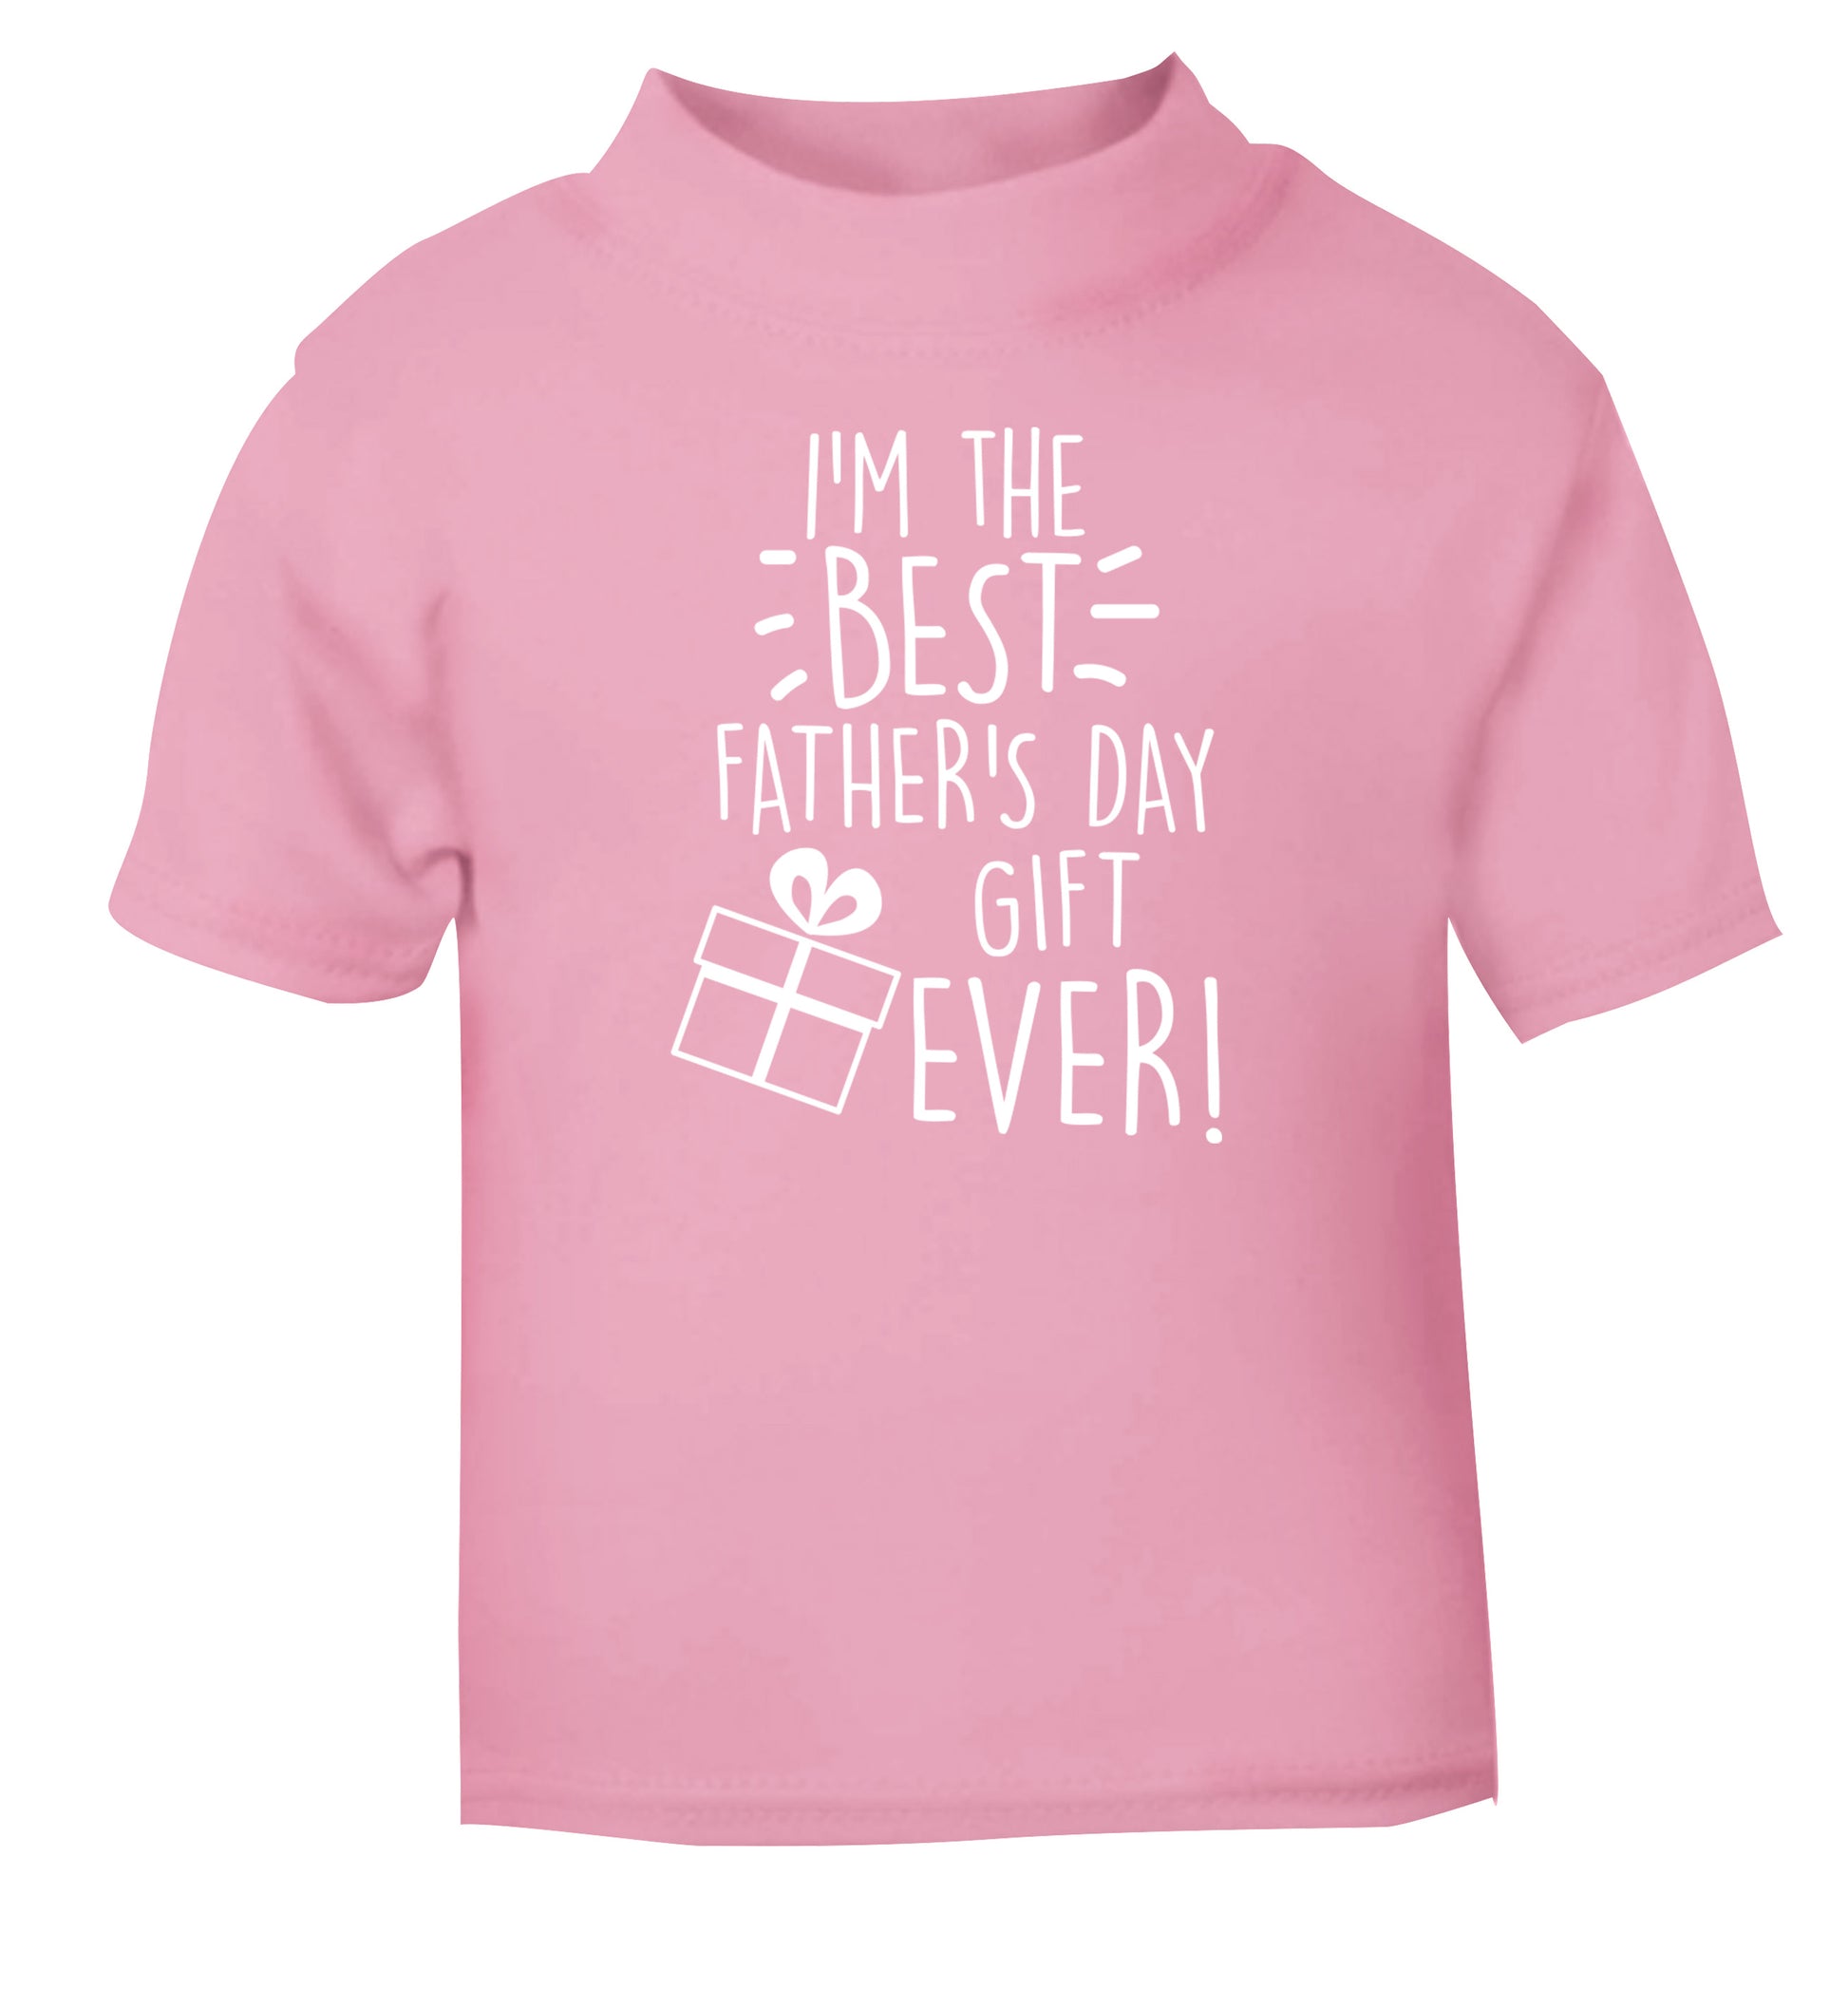 I'm the BEST father's day gift ever! light pink Baby Toddler Tshirt 2 Years